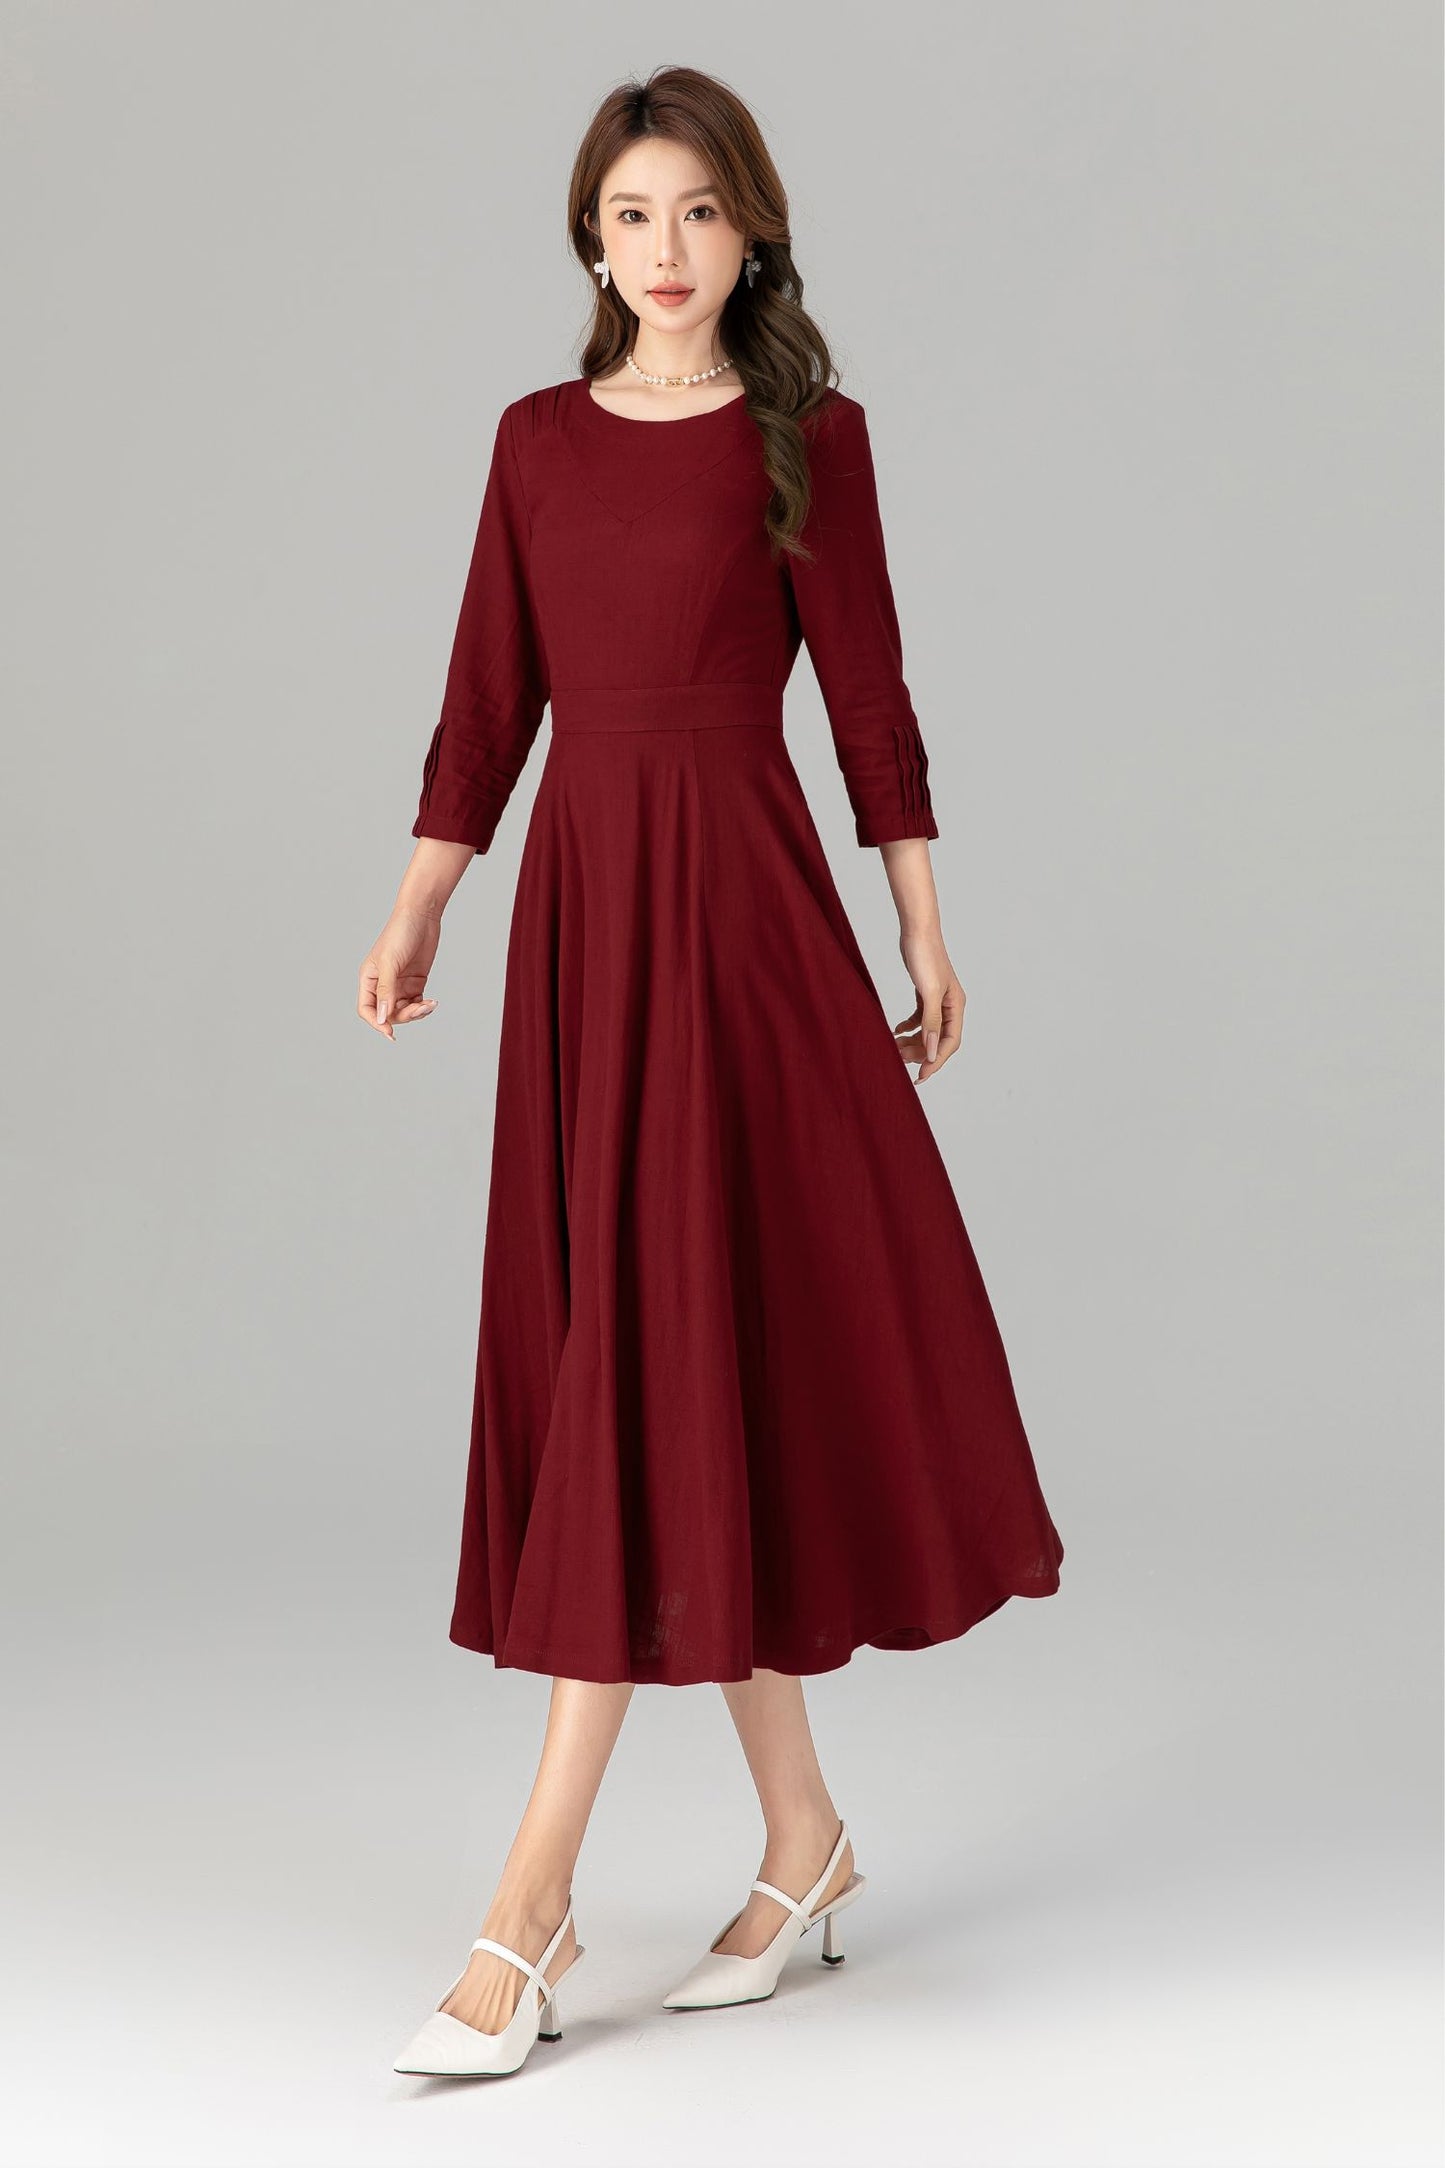 Fit and flare womens spring linen dresses 4910